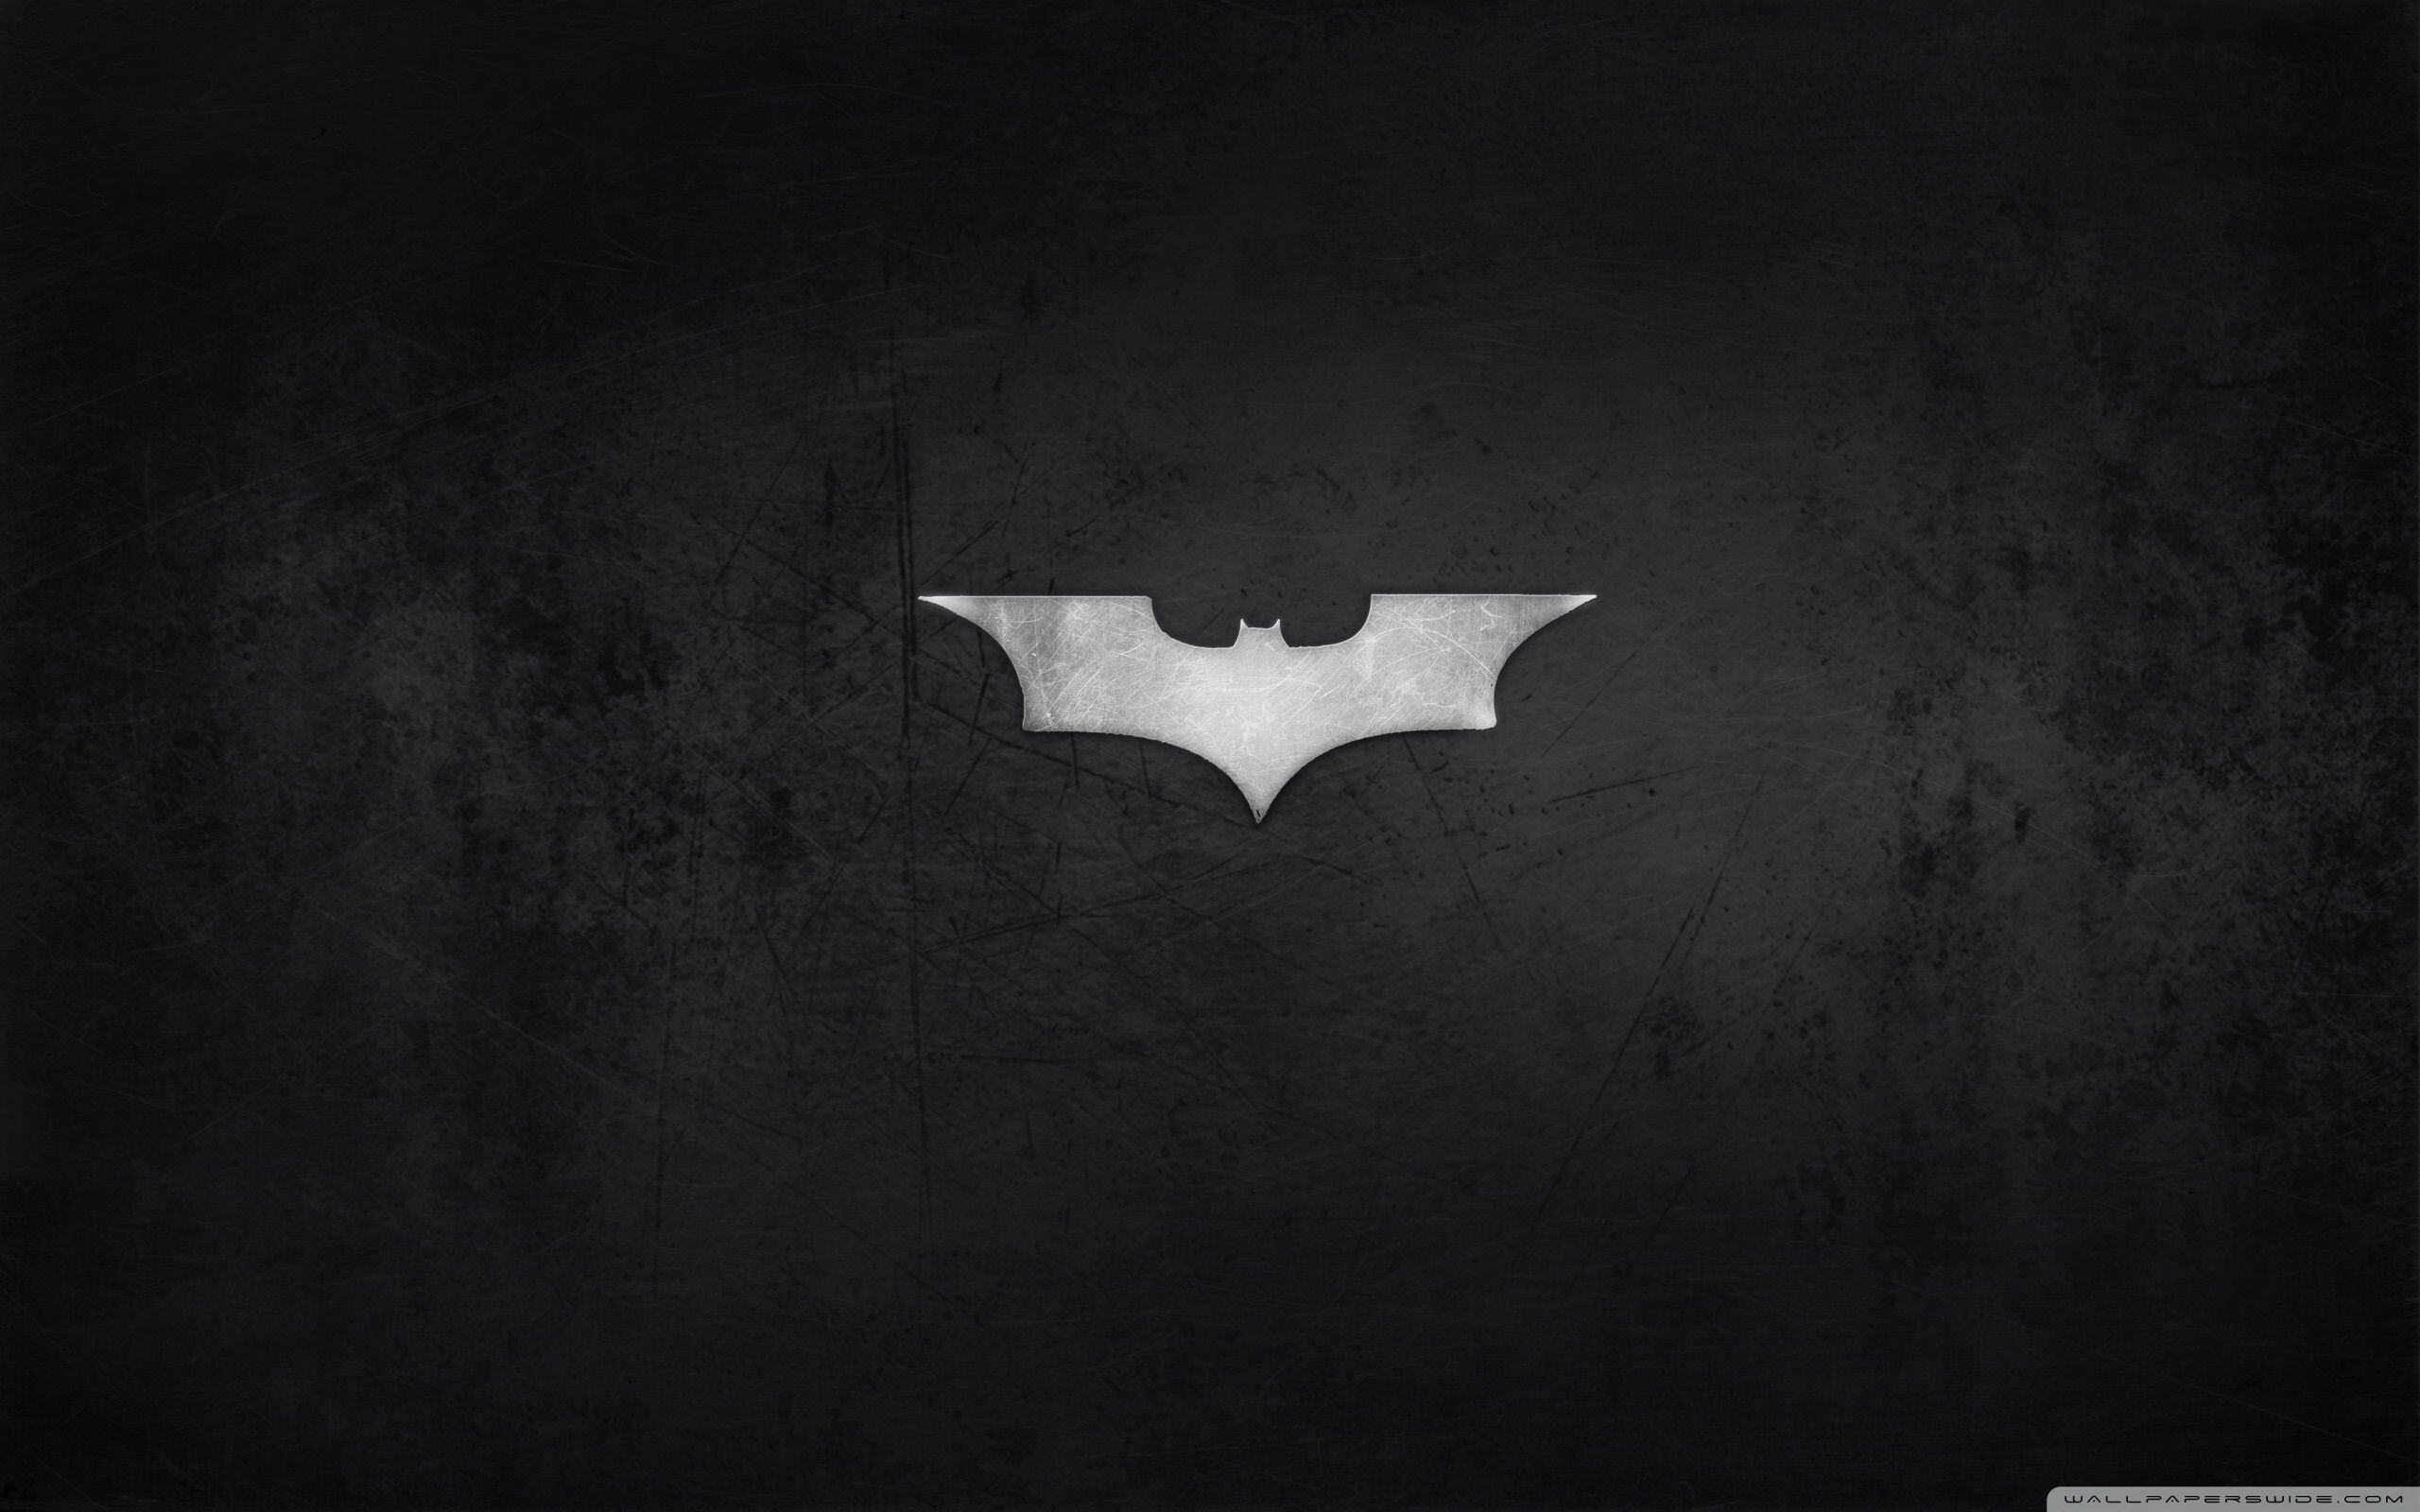 57+ Batman Wallpapers: HD, 4K, 5K for PC and Mobile | Download free images  for iPhone, Android